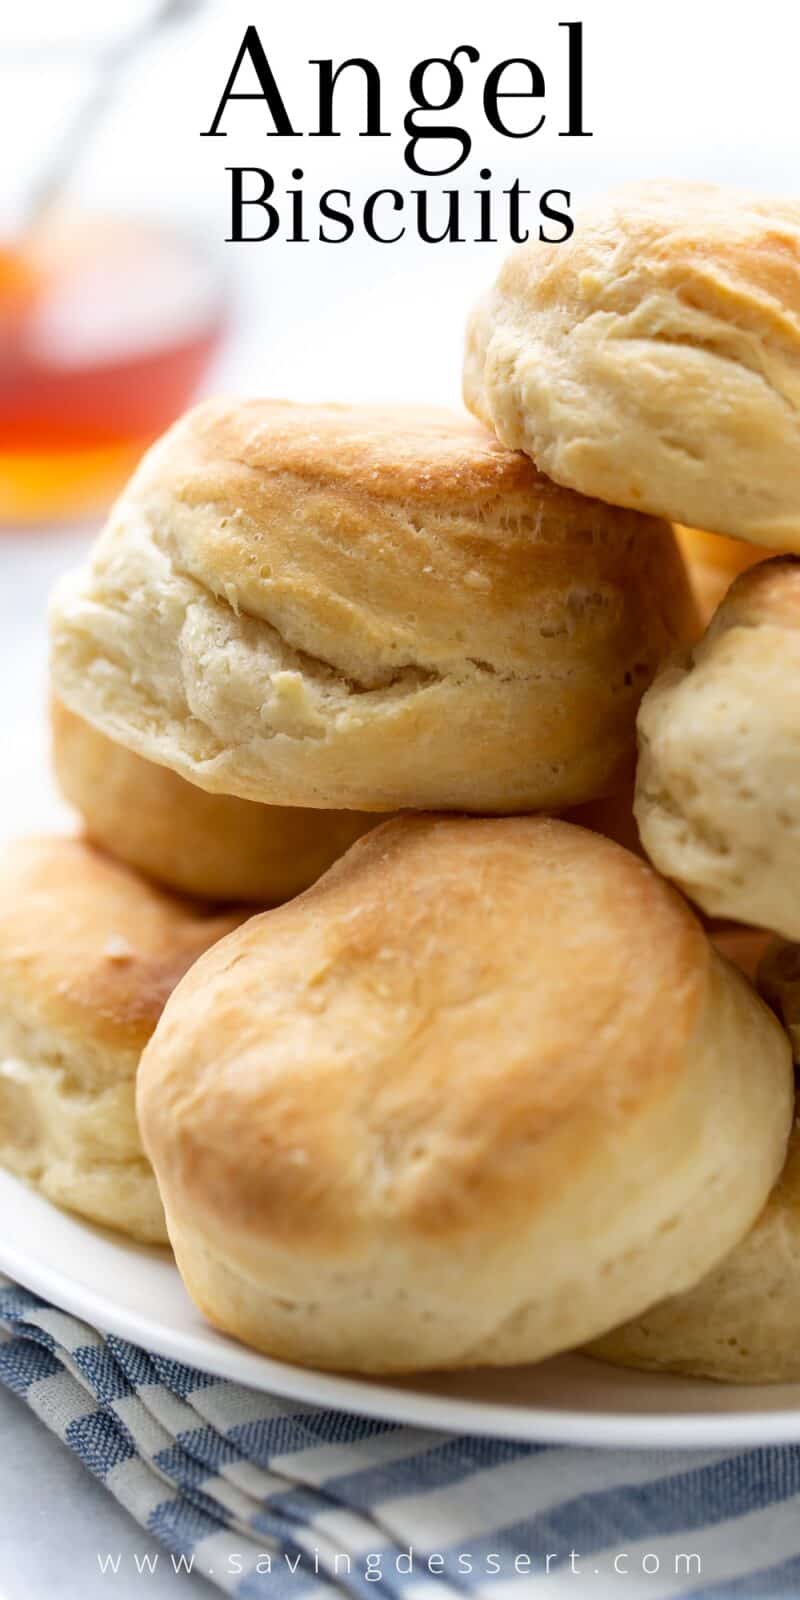 A stack of yeasted angel biscuits on a plate